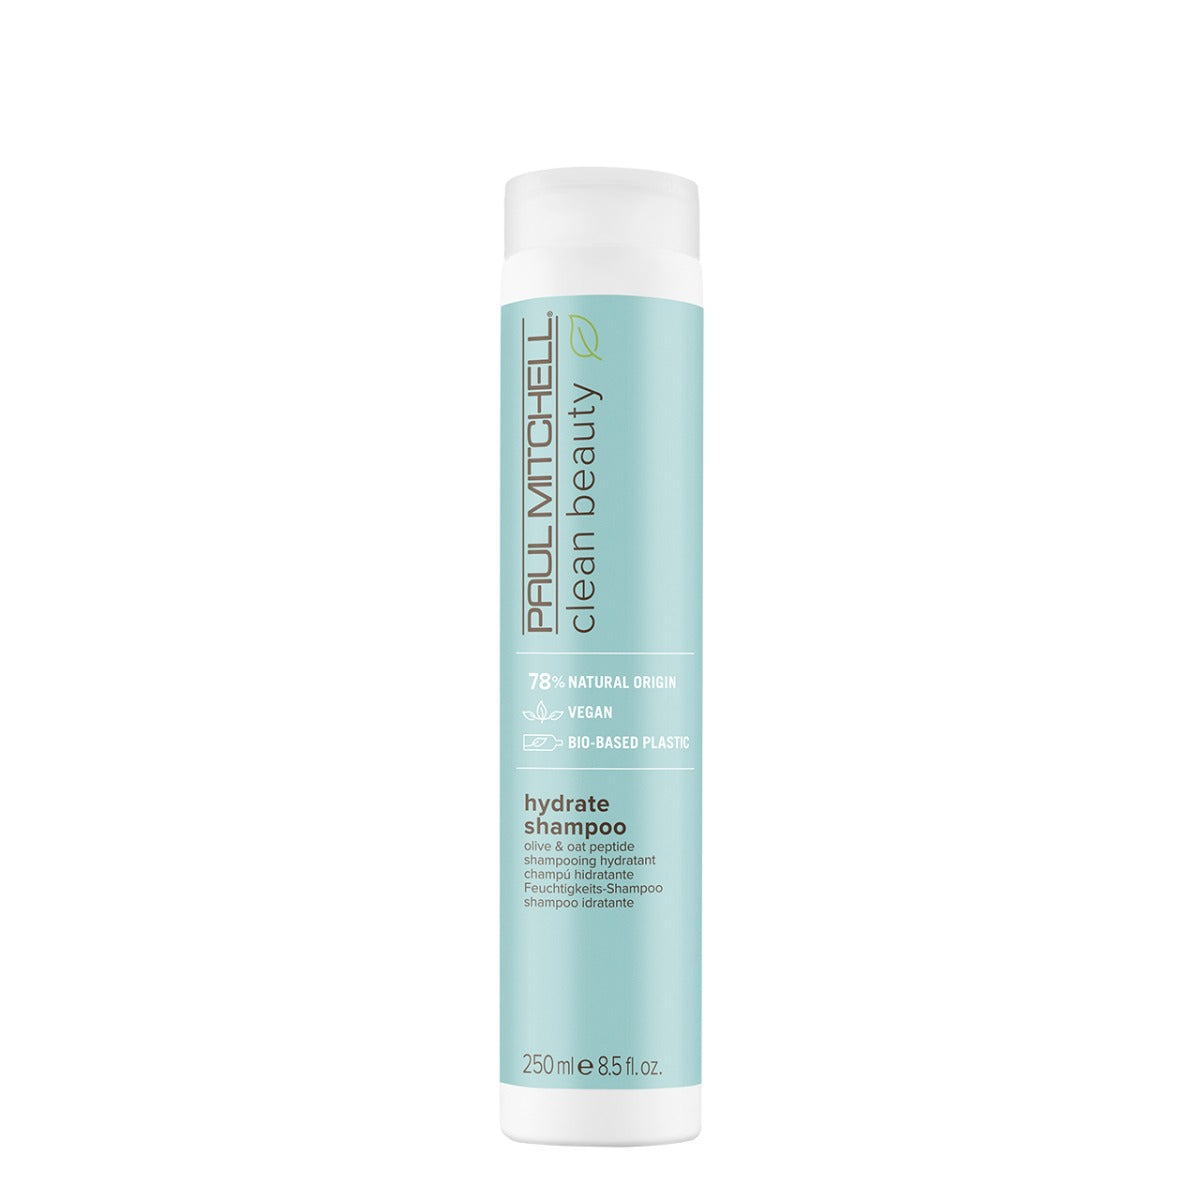 Clean Beauty Hydrate Shampoo - by Paul Mitchell |ProCare Outlet|